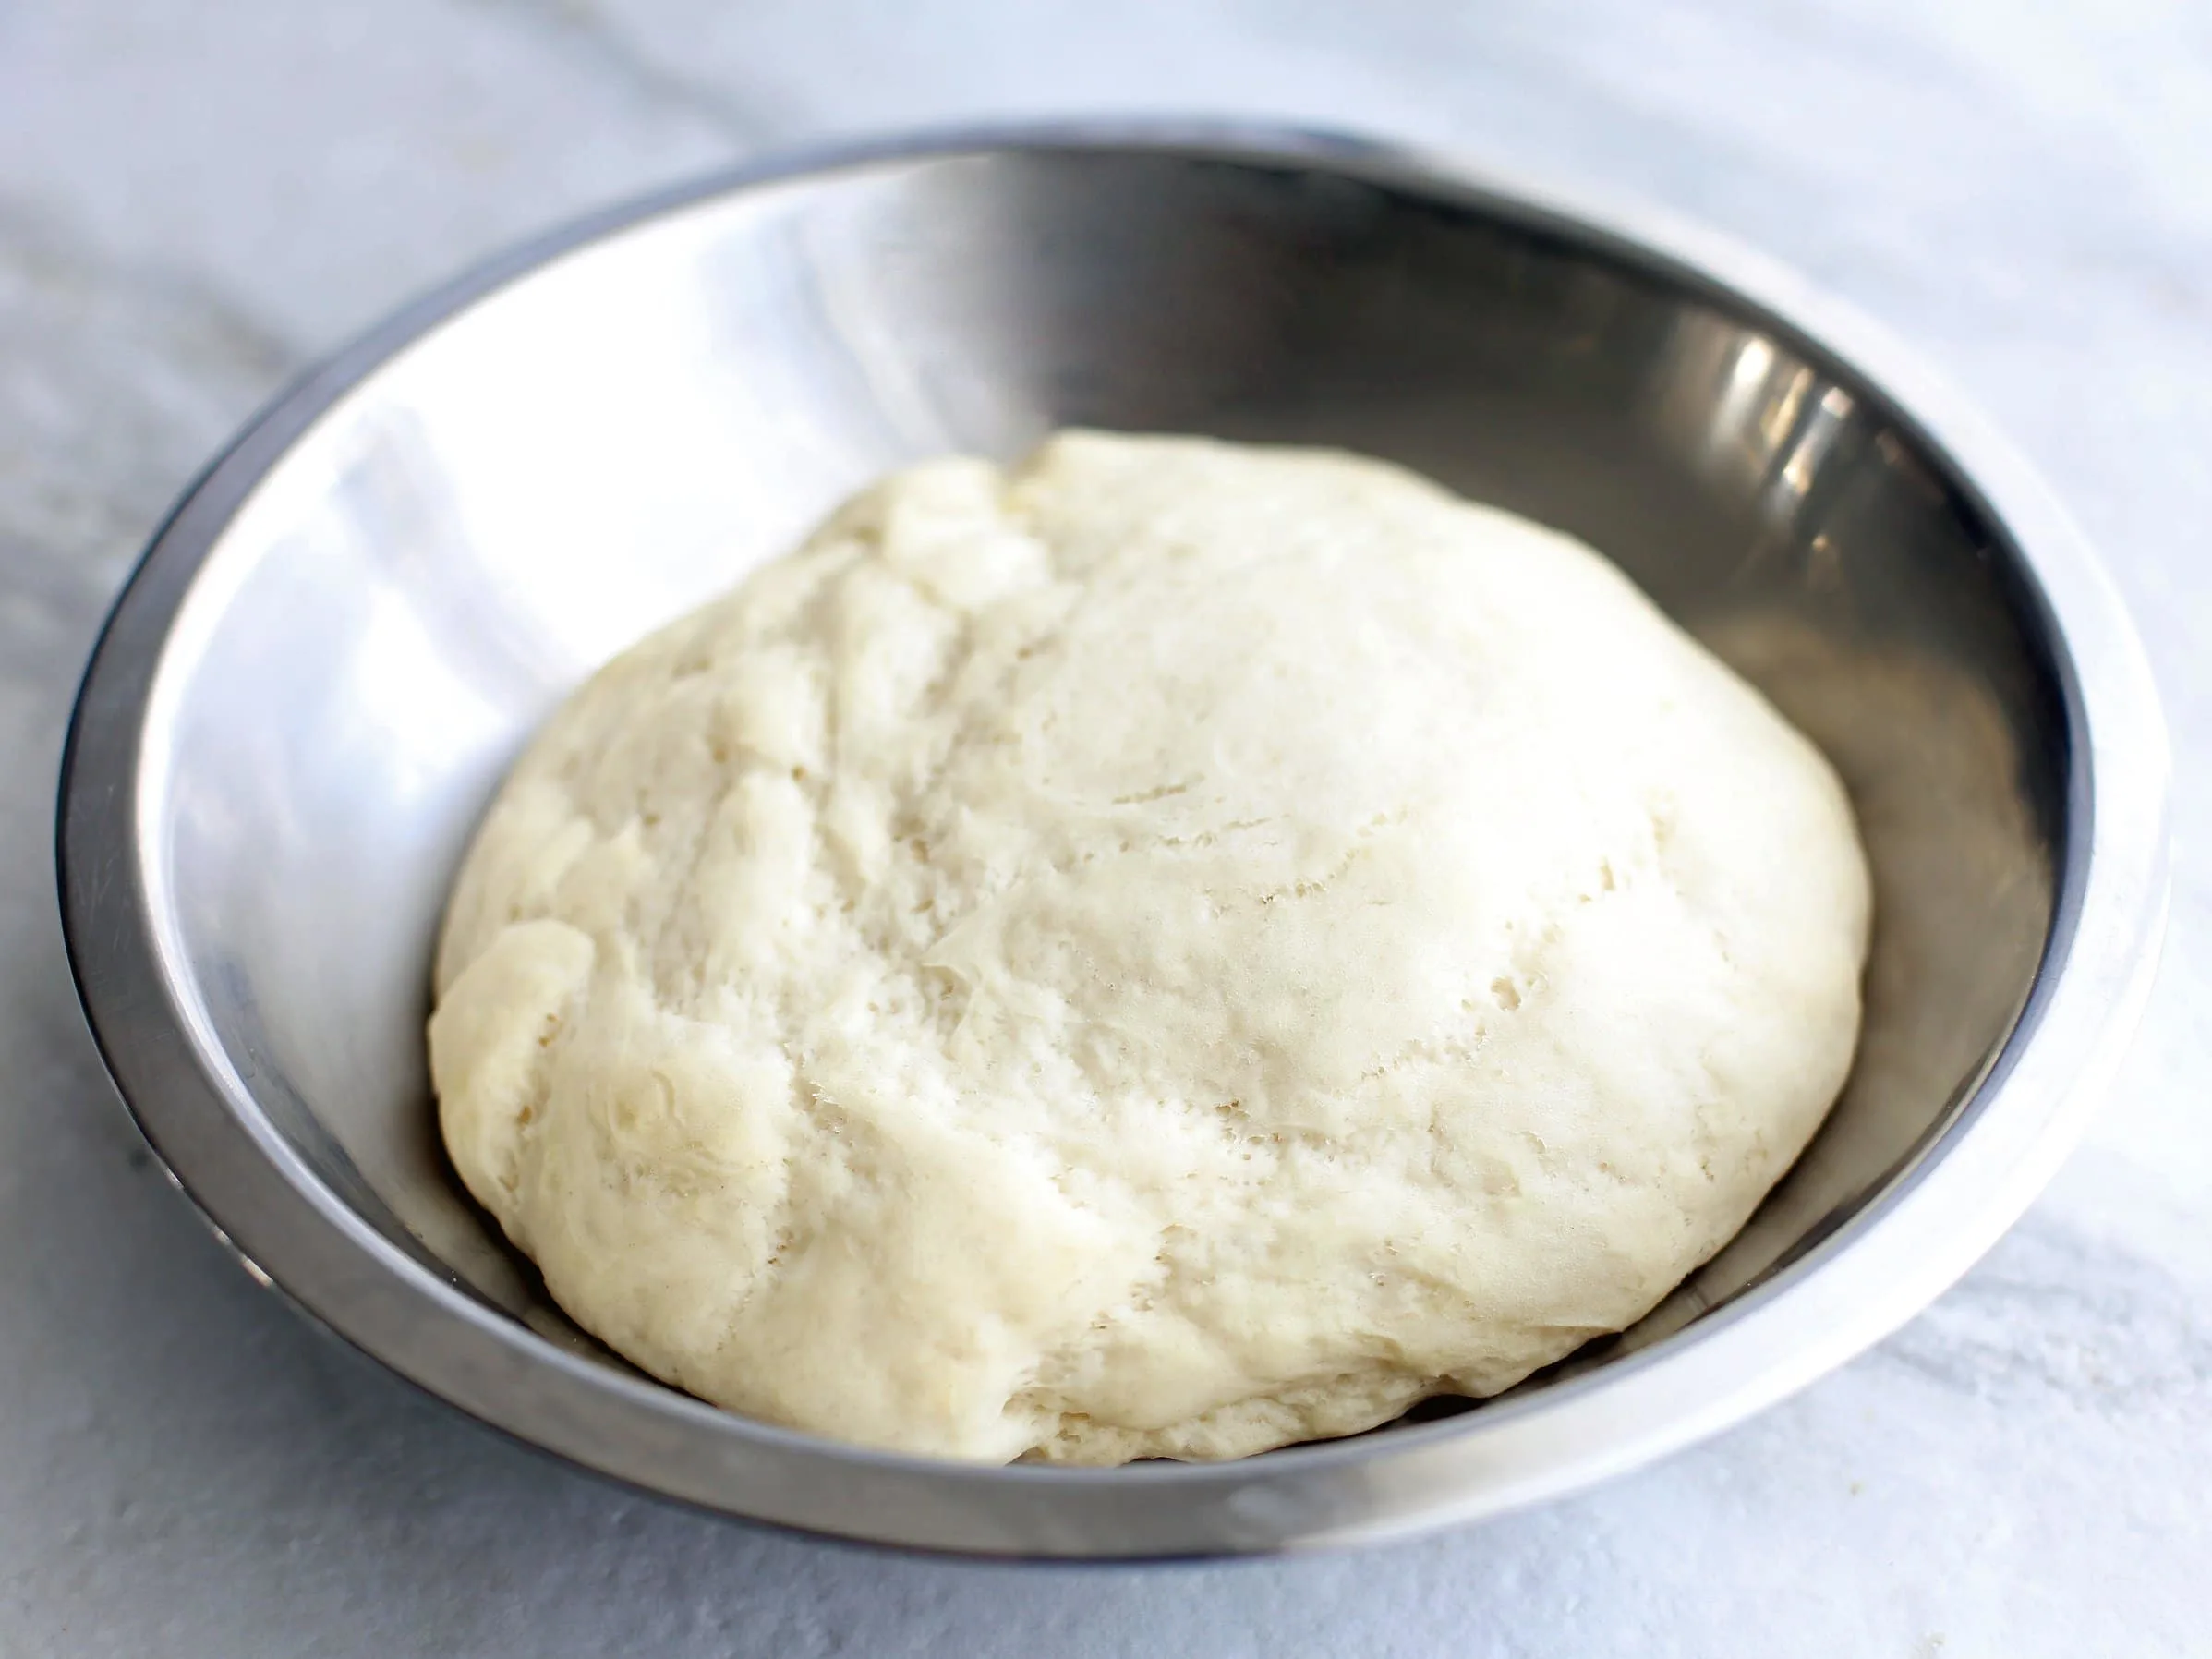 Proved pizza dough in a metal bowl.